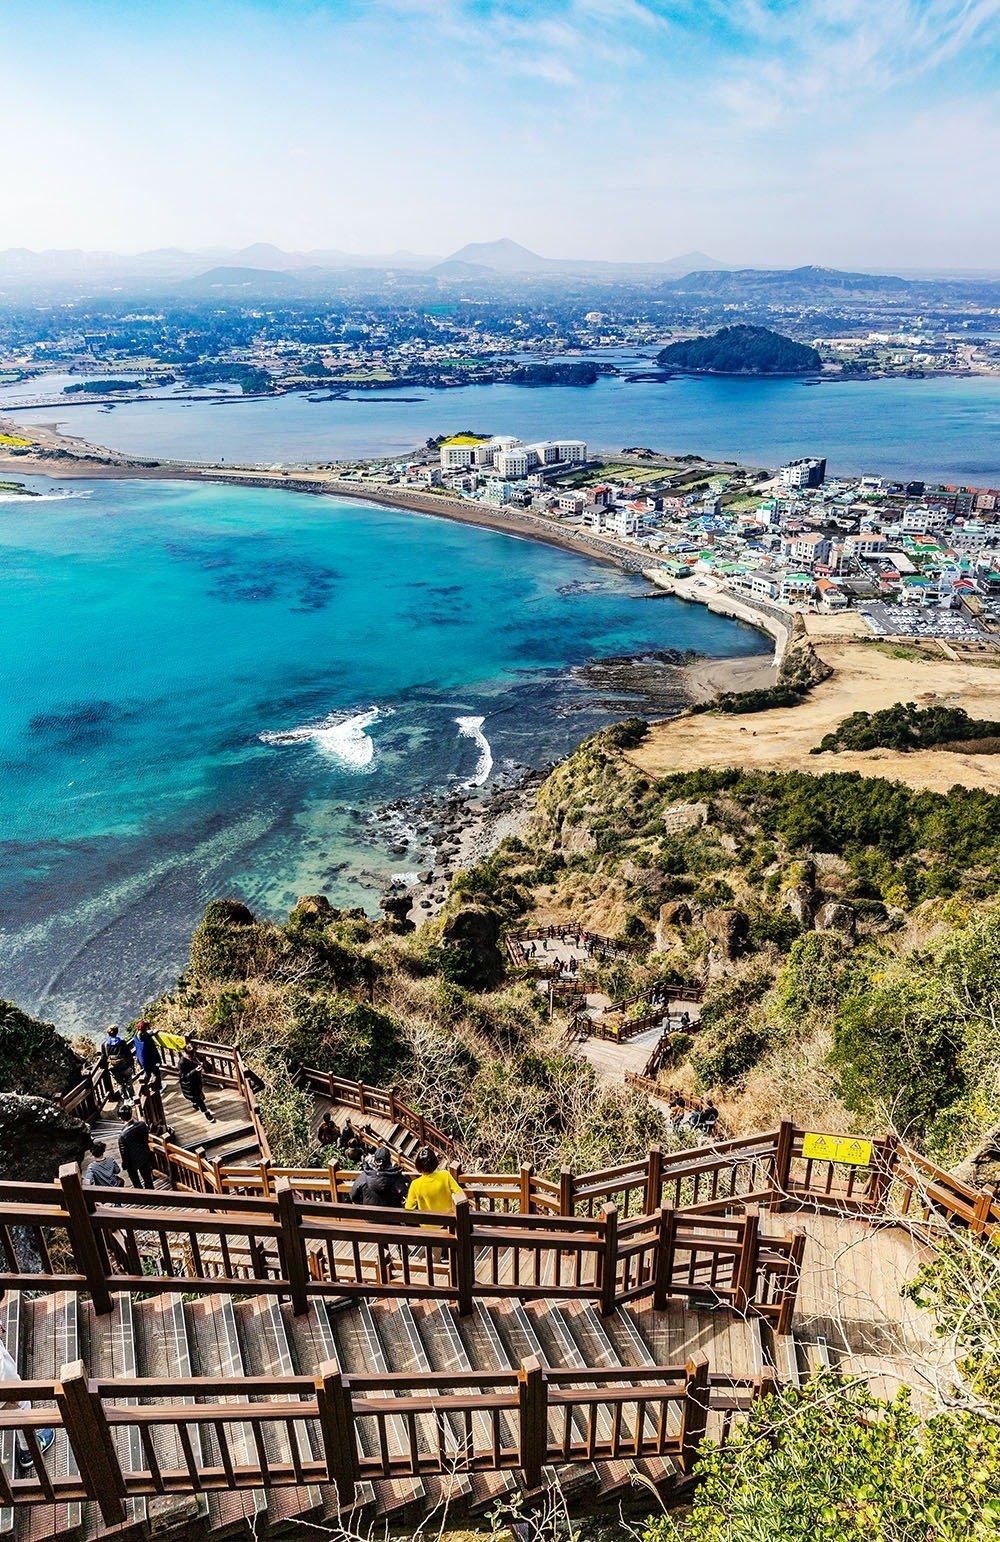 Drive around Jeju, South Korea’s favorite holiday destination and see the island’s stunning canola fields and natural landscapes. If you love nature, there’s much to see and do in Jeju. Plan your holiday now - here’s where to stay in Jeju.